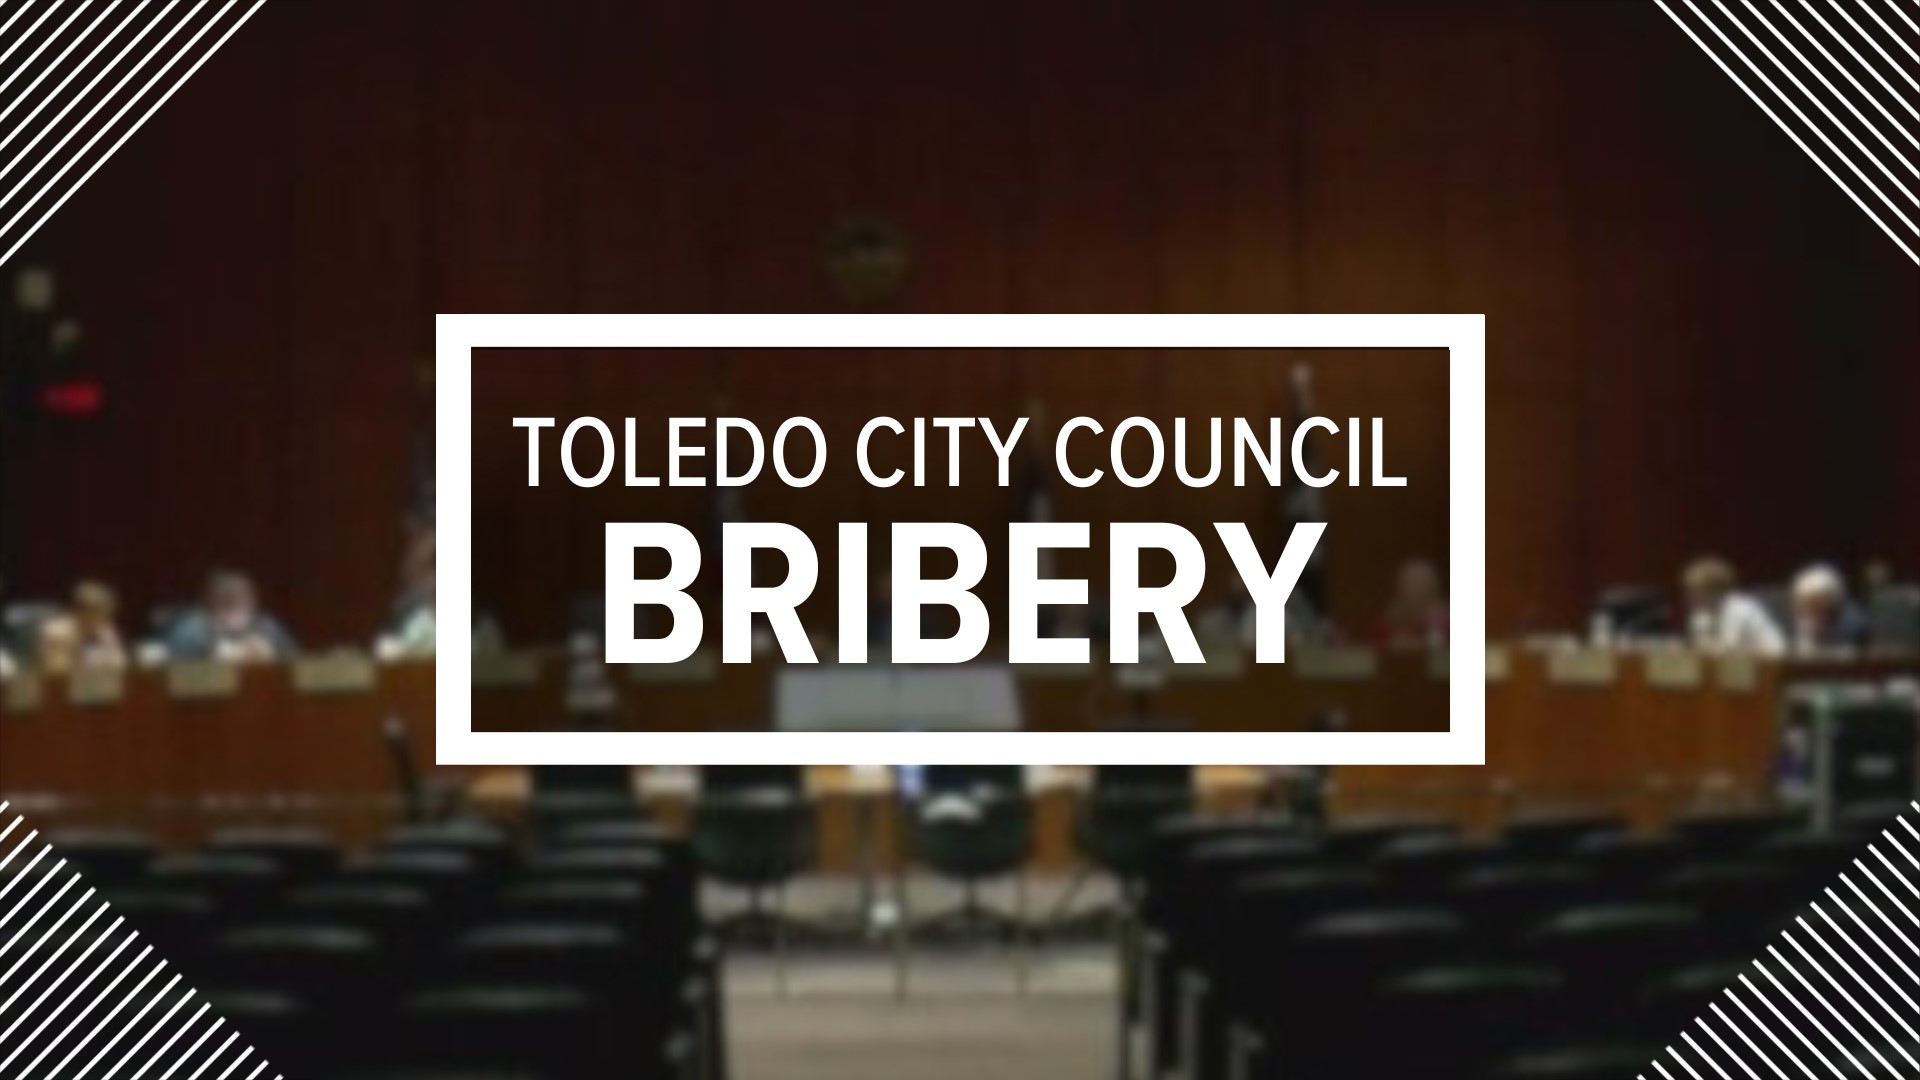 Nabil Shaheen is charged with extortion for allegedly aiding and abetting Tyrone Riley in exchange for Riley's influence as a member of Toledo City Council.